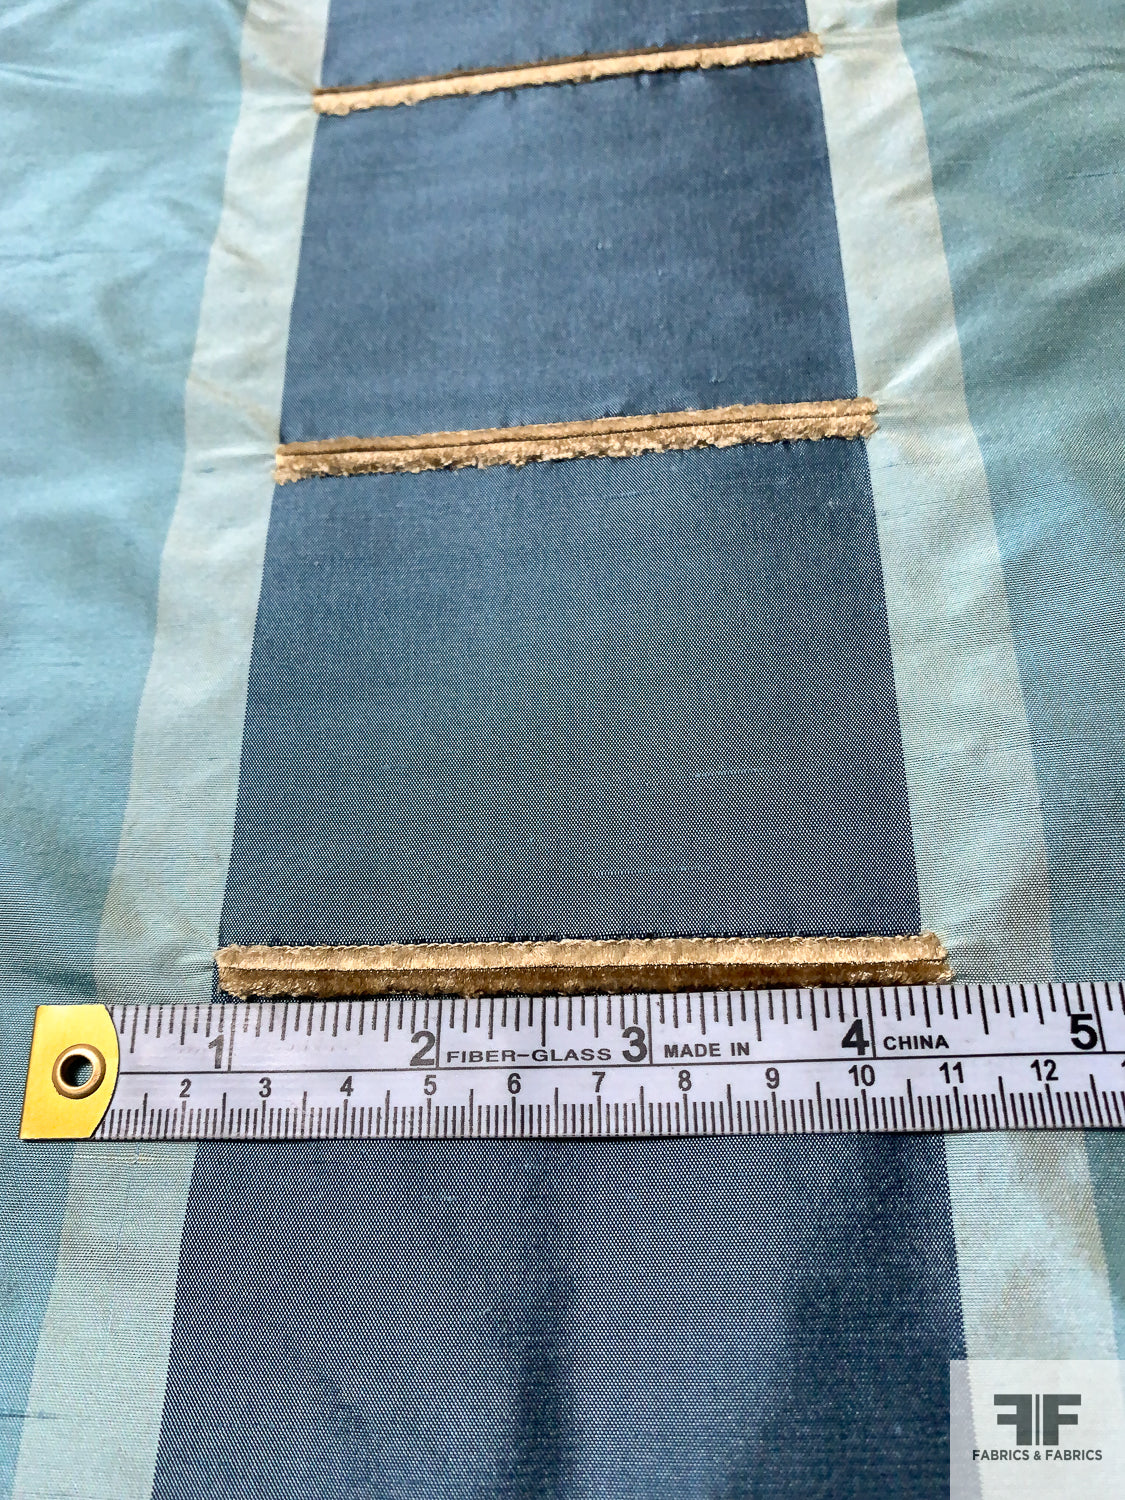 Linear Silk Taffeta-Shantung with Chenille Line Detailing - Dusty Turquoise / Antique Gold